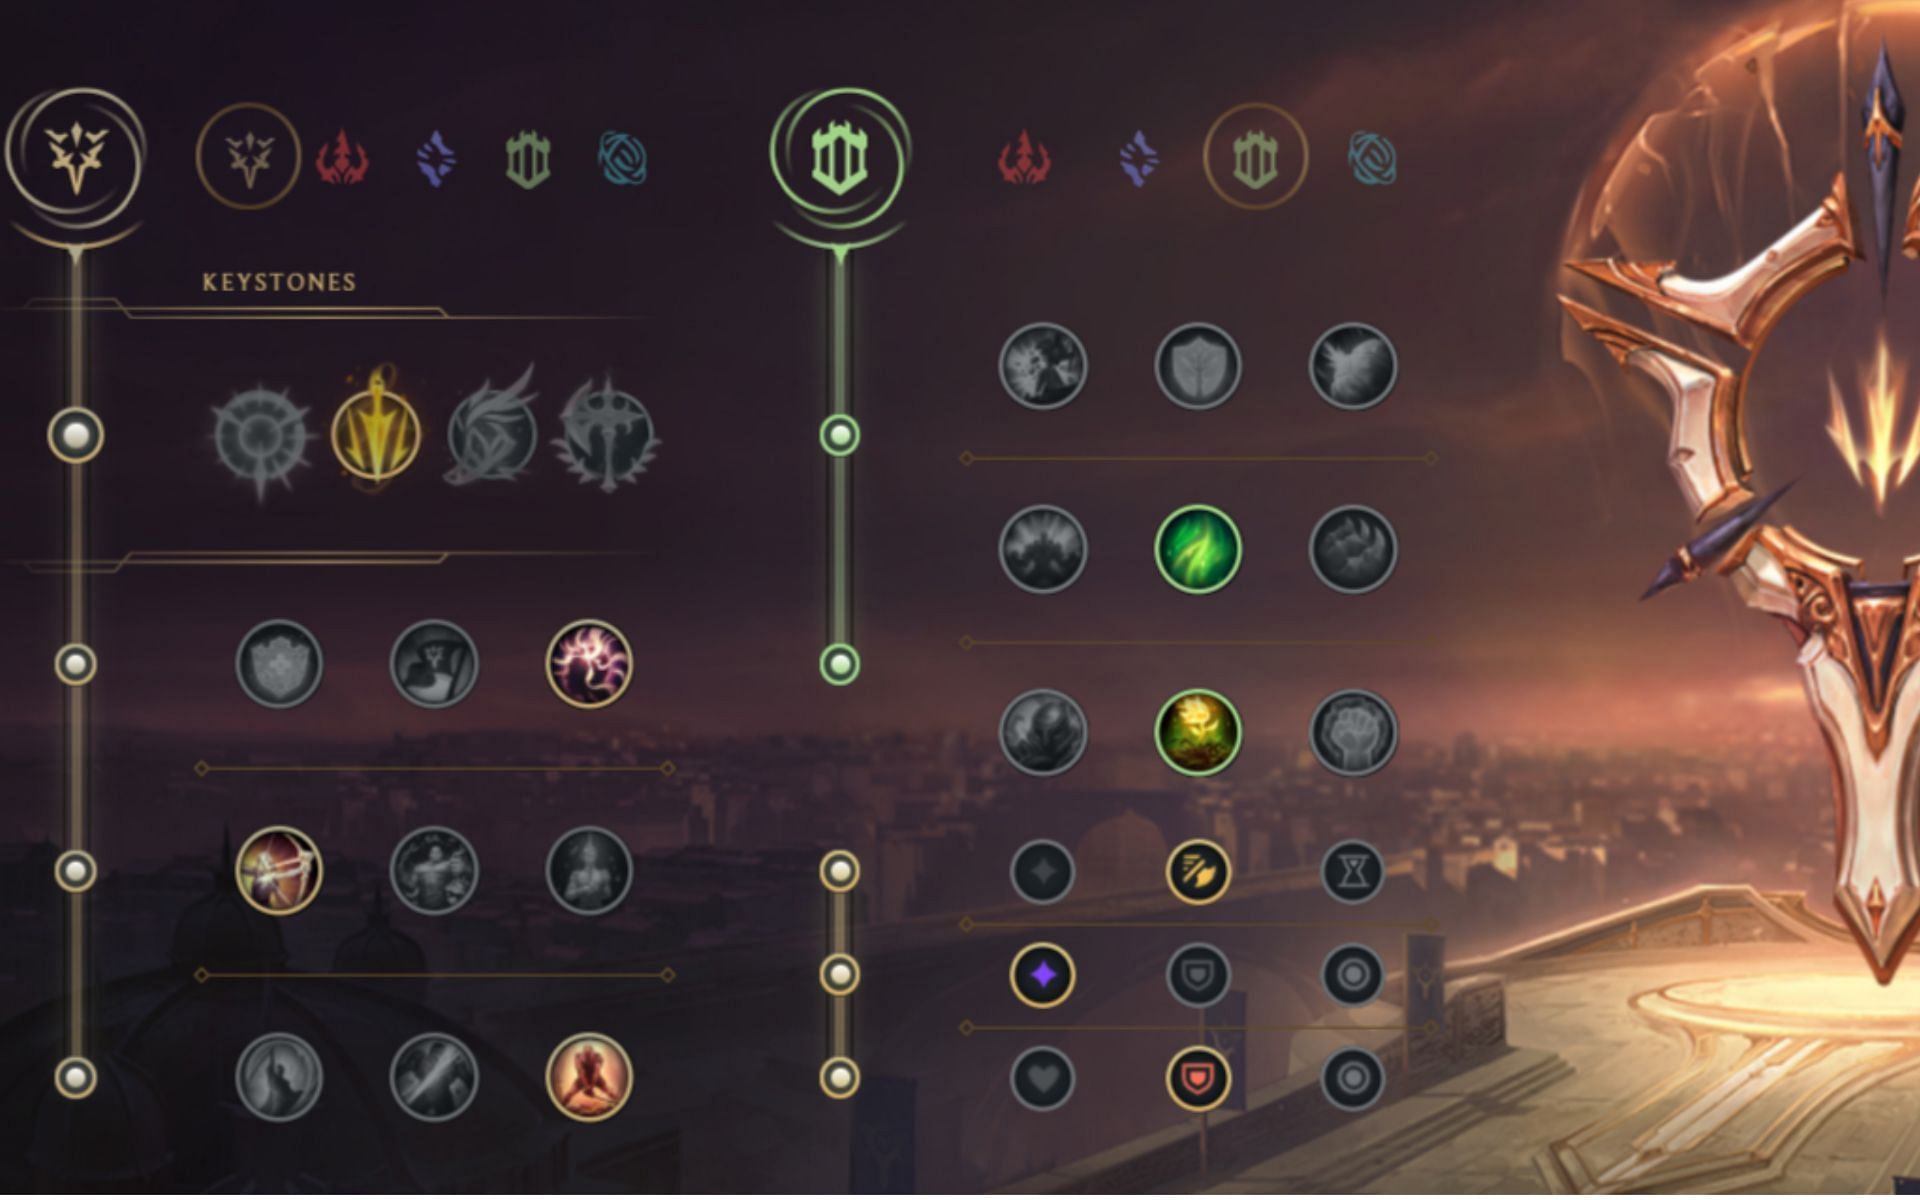 Illaoi Build for Top with Highest Winrate, Guides, Runes, Items